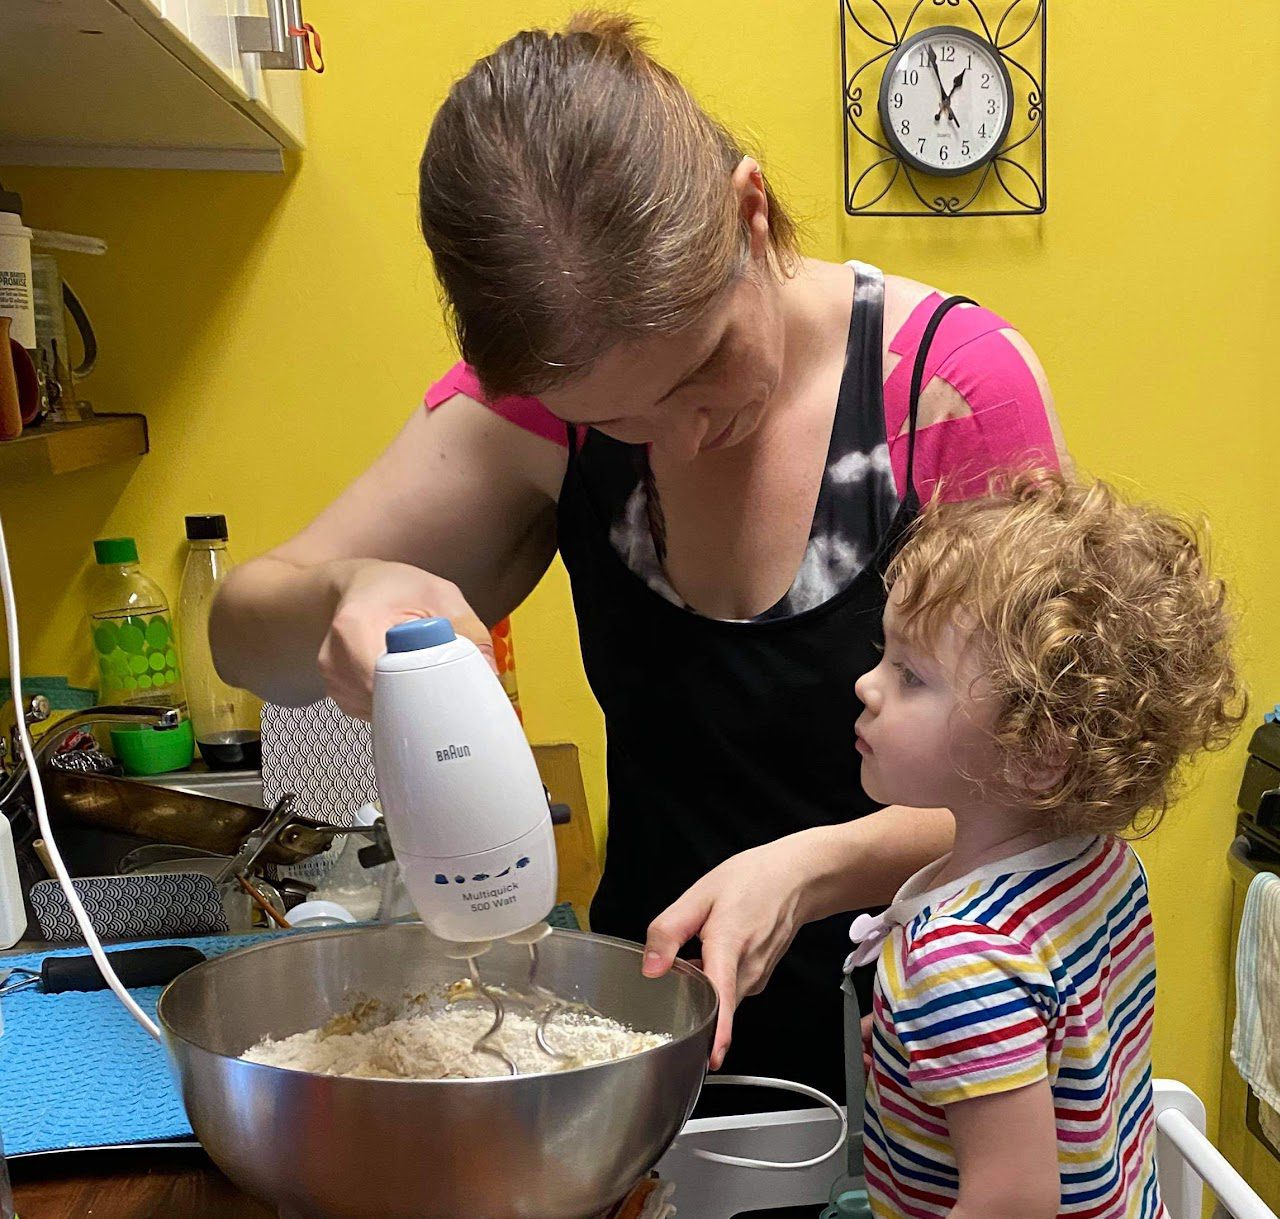 Corinna Singleman using an electric hand mixer on dough in a large metal bowl. A child pays attention attentively on the side.